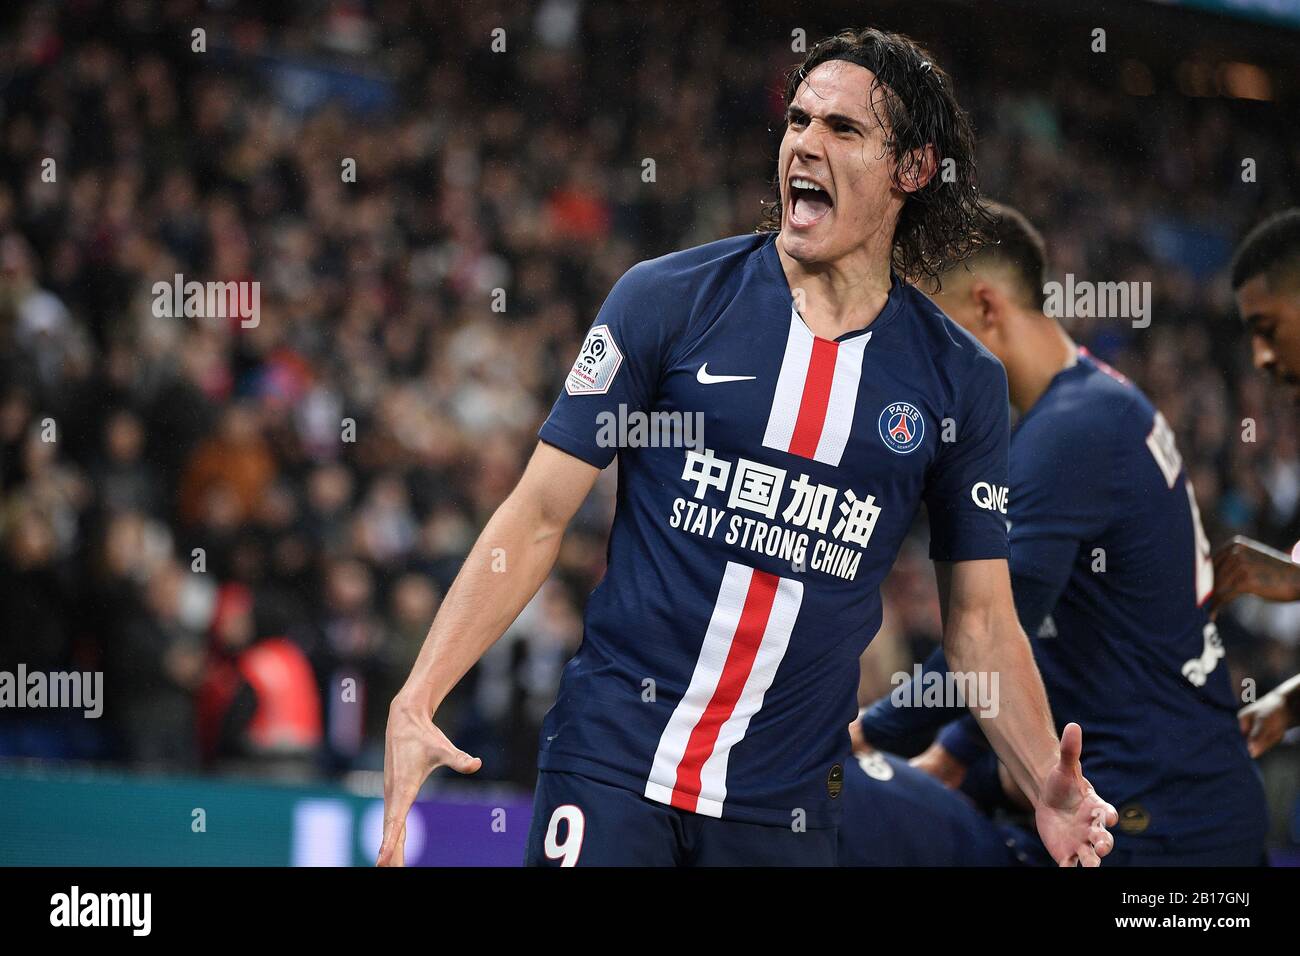 psg stay strong china jersey